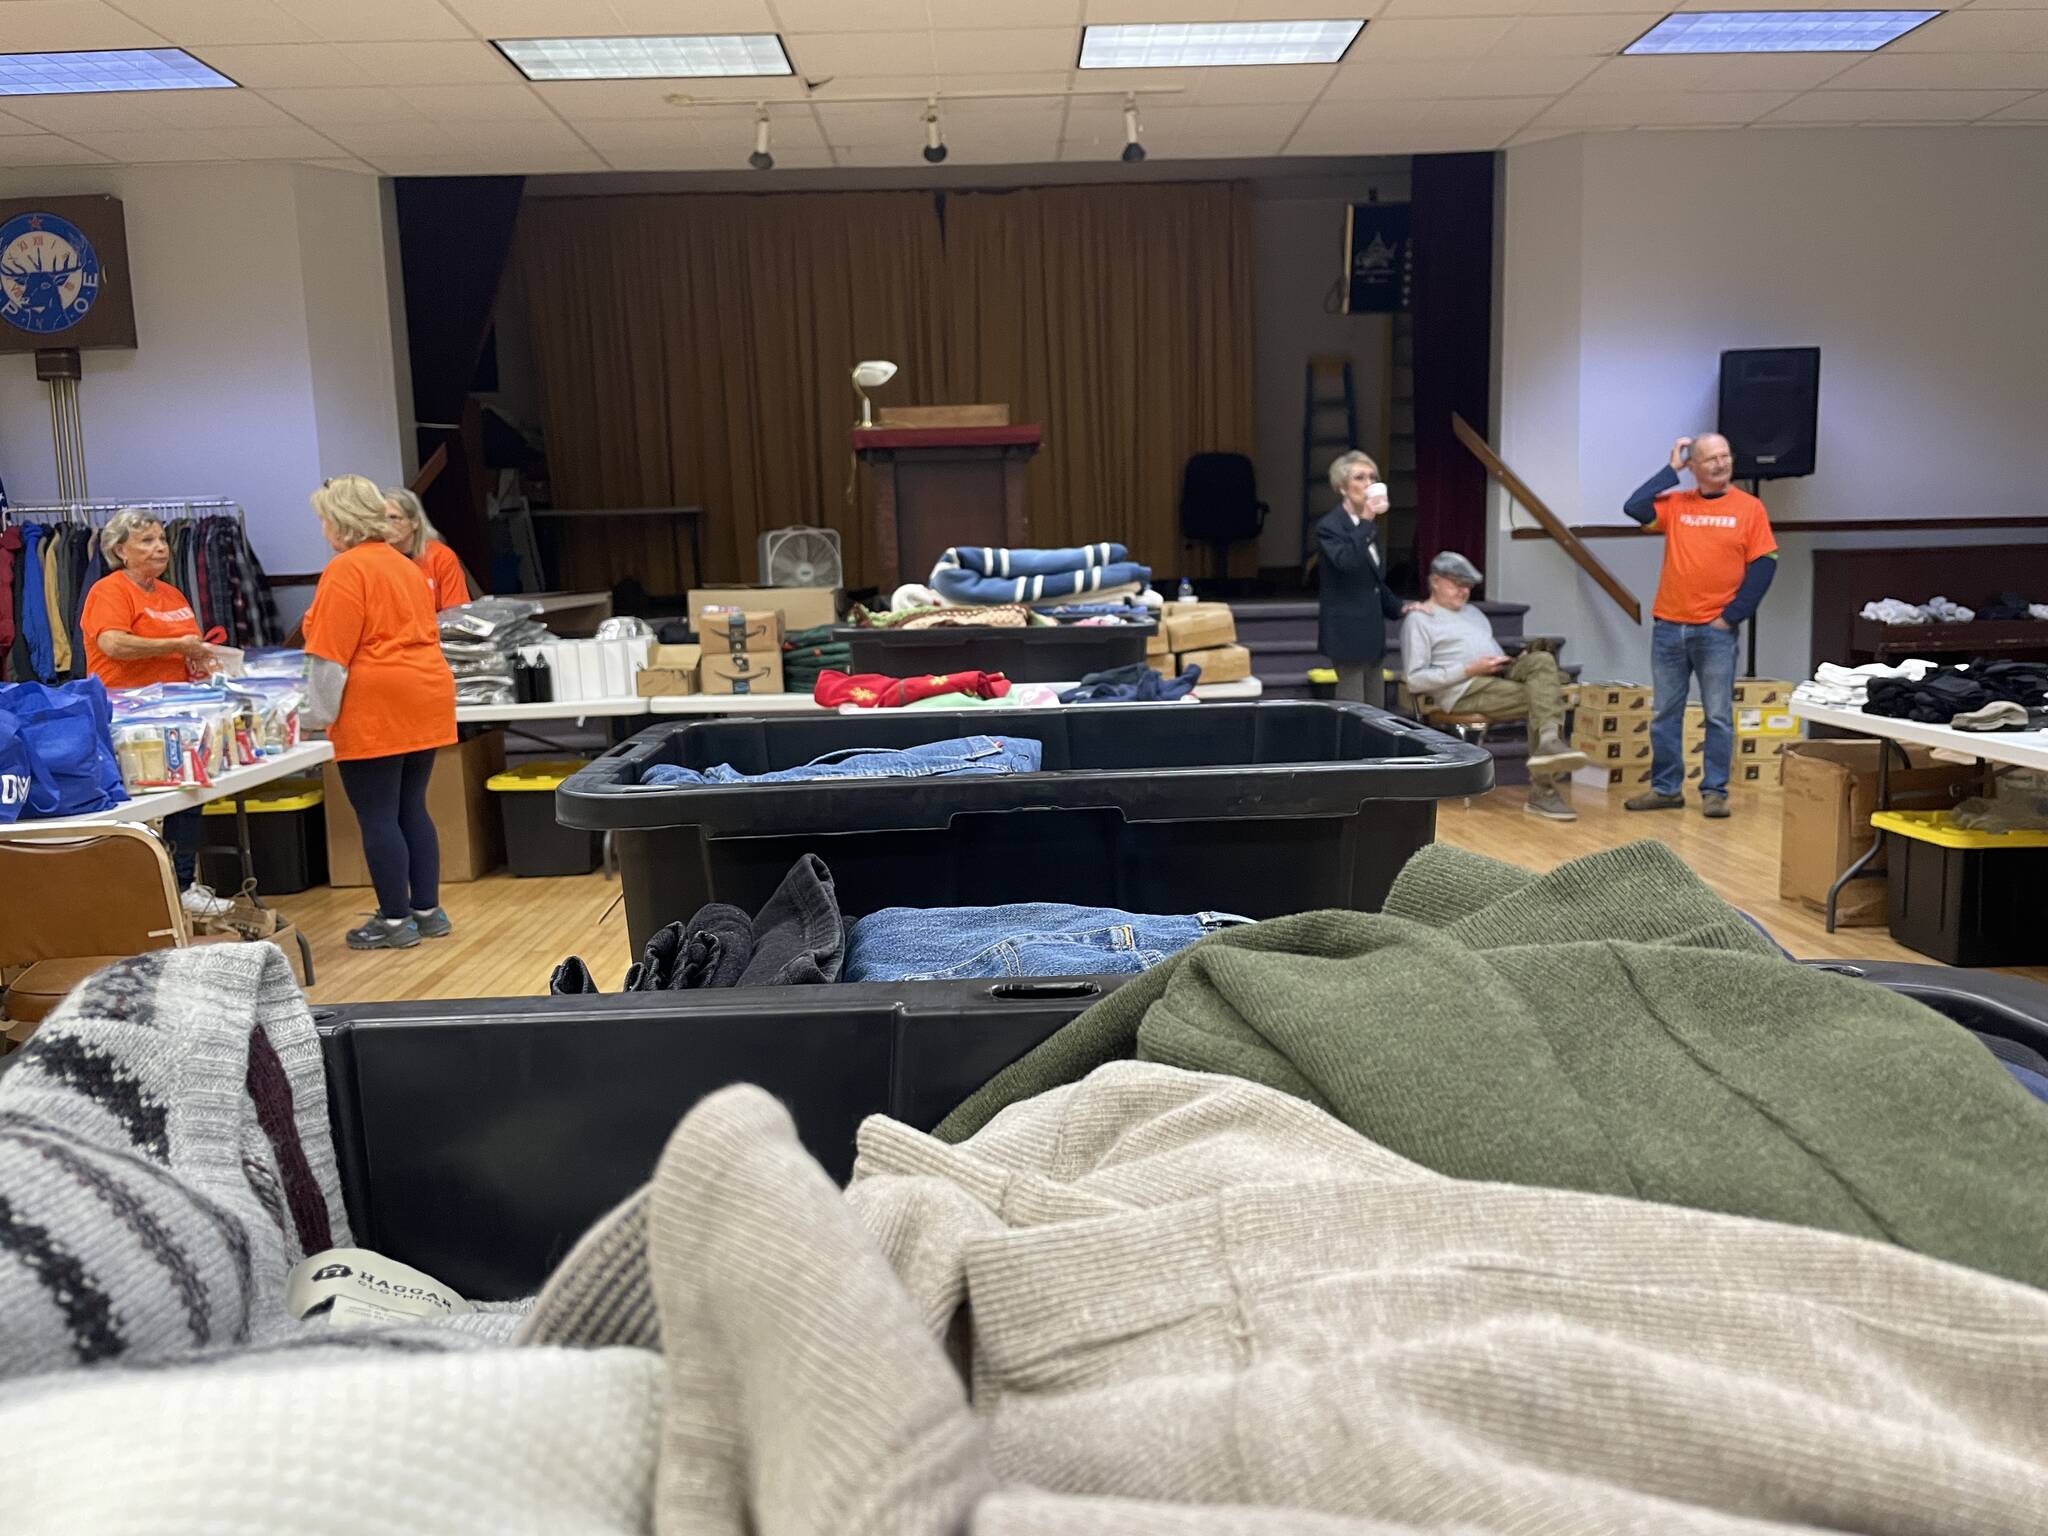 Michael S. Lockett / The Daily World
Blankets, in the foreground, were just one of the goods veterans experiencing homelessness could get for free during a stand-down in Hoquiam on Oct. 2.